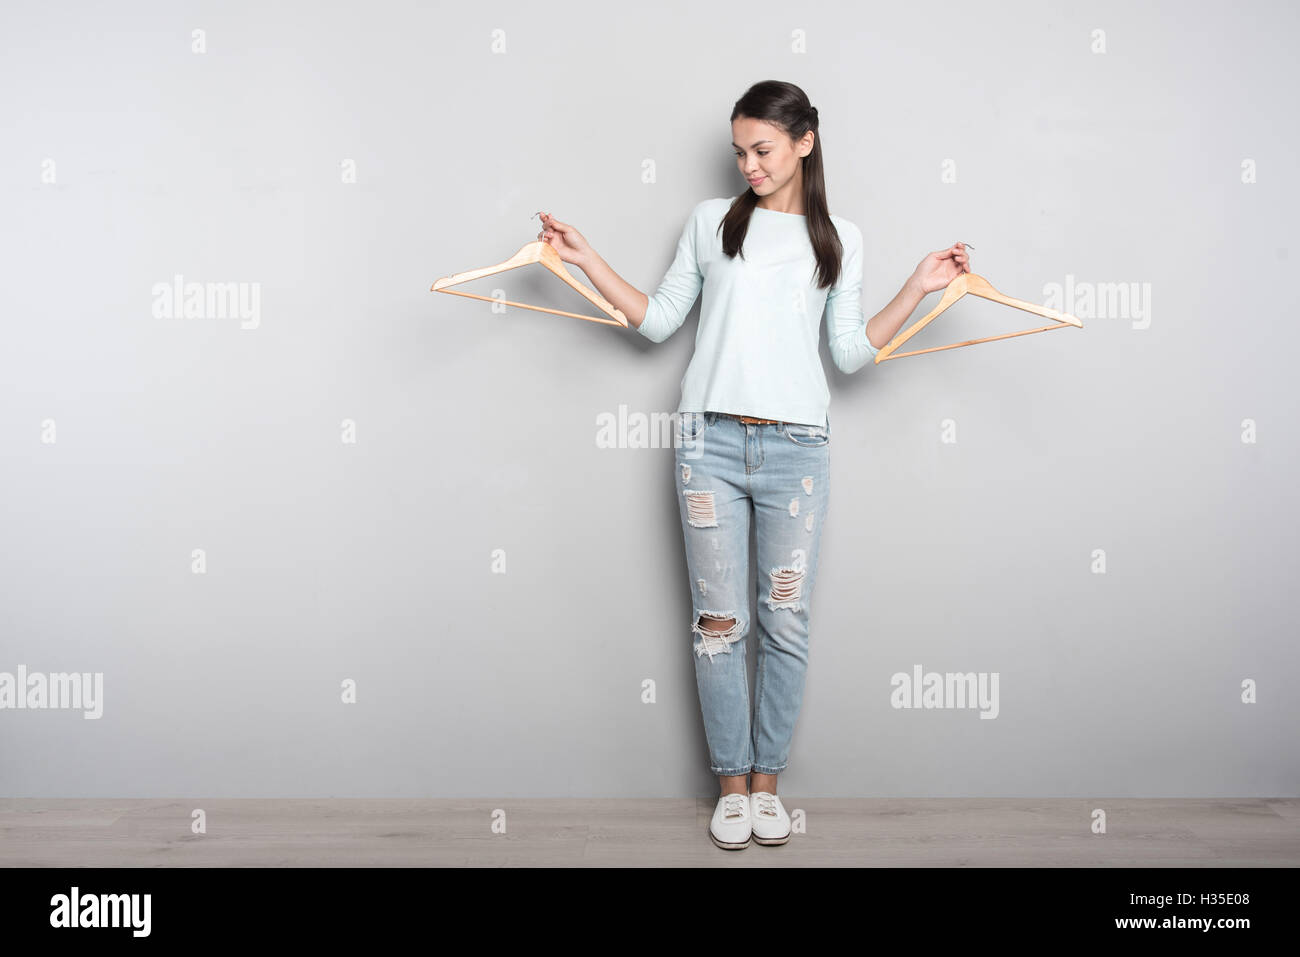 Peasant delighted woman holding clothes hangers. Stock Photo